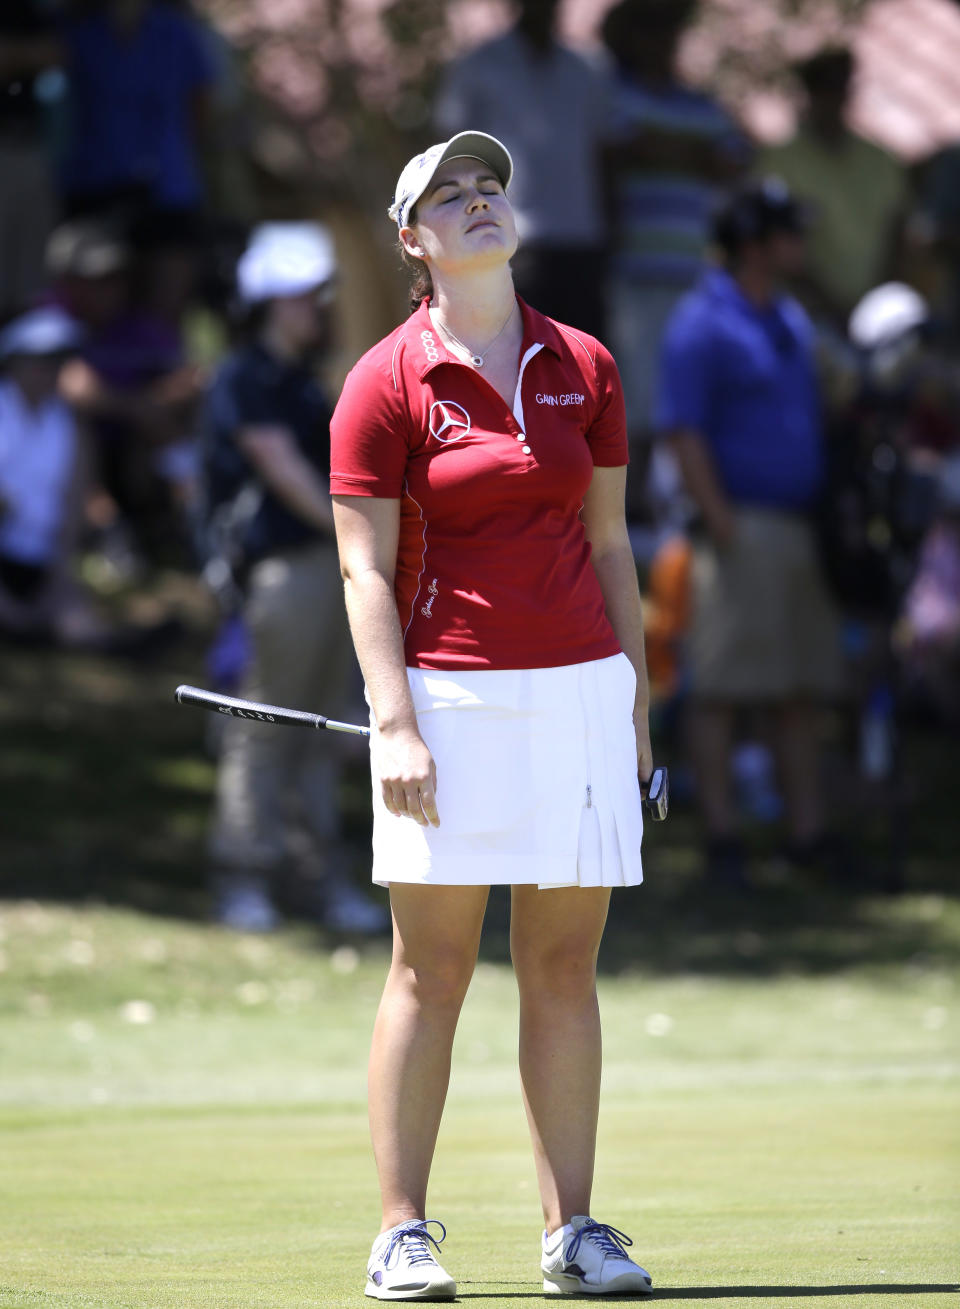 Caroline Masson, of Germany, reacts to missing a putt on the ninth hole during the third round of the North Texas LPGA Shootout golf tournament at Las Colinas Country Club in Irving, Texas, Saturday, May 3, 2014. (AP Photo/LM Otero)